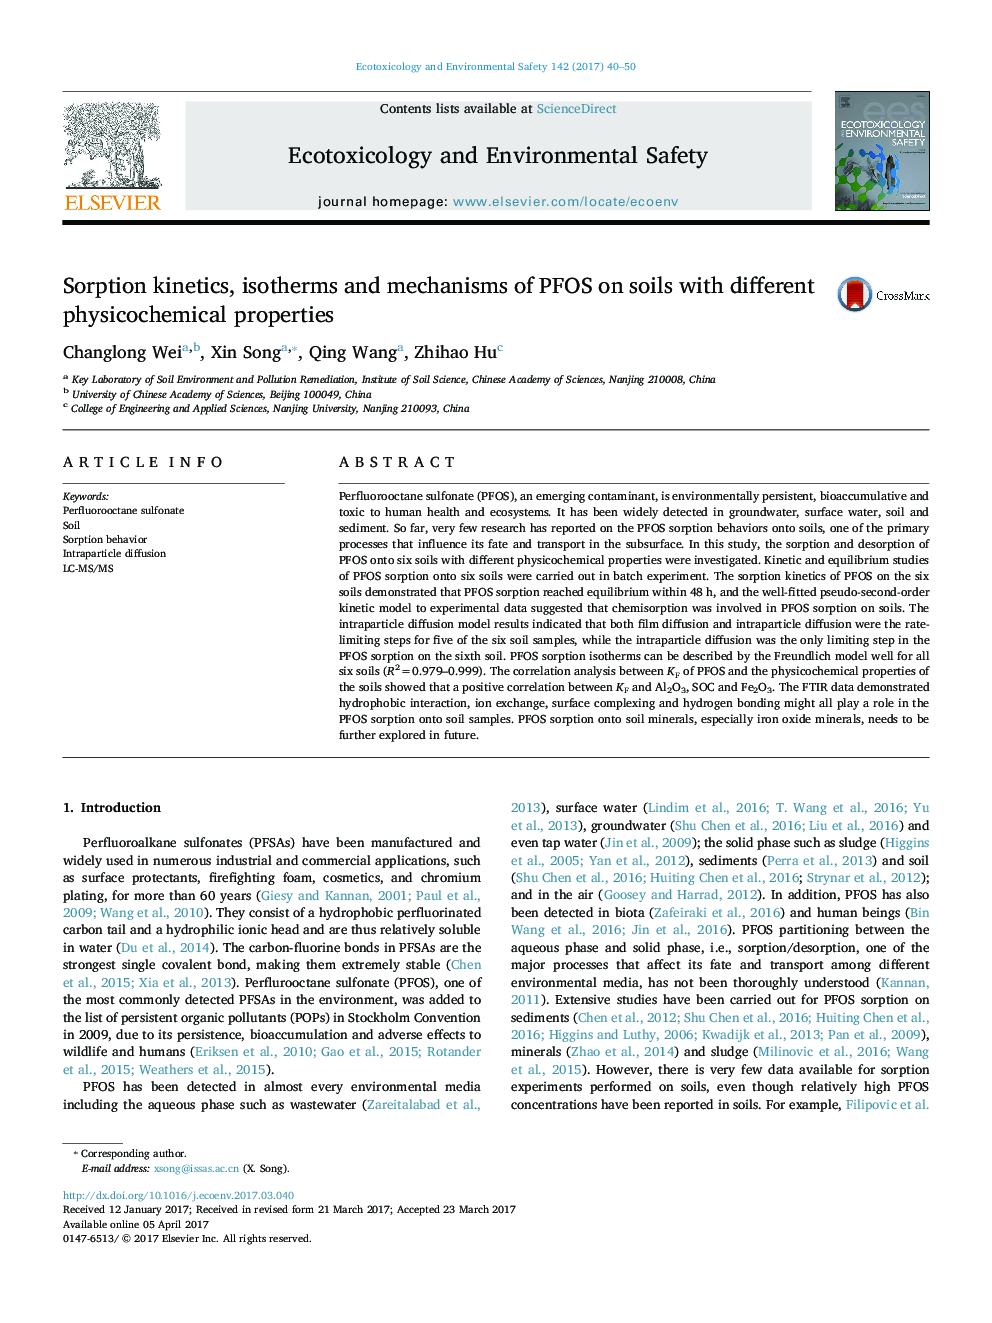 Sorption kinetics, isotherms and mechanisms of PFOS on soils with different physicochemical properties